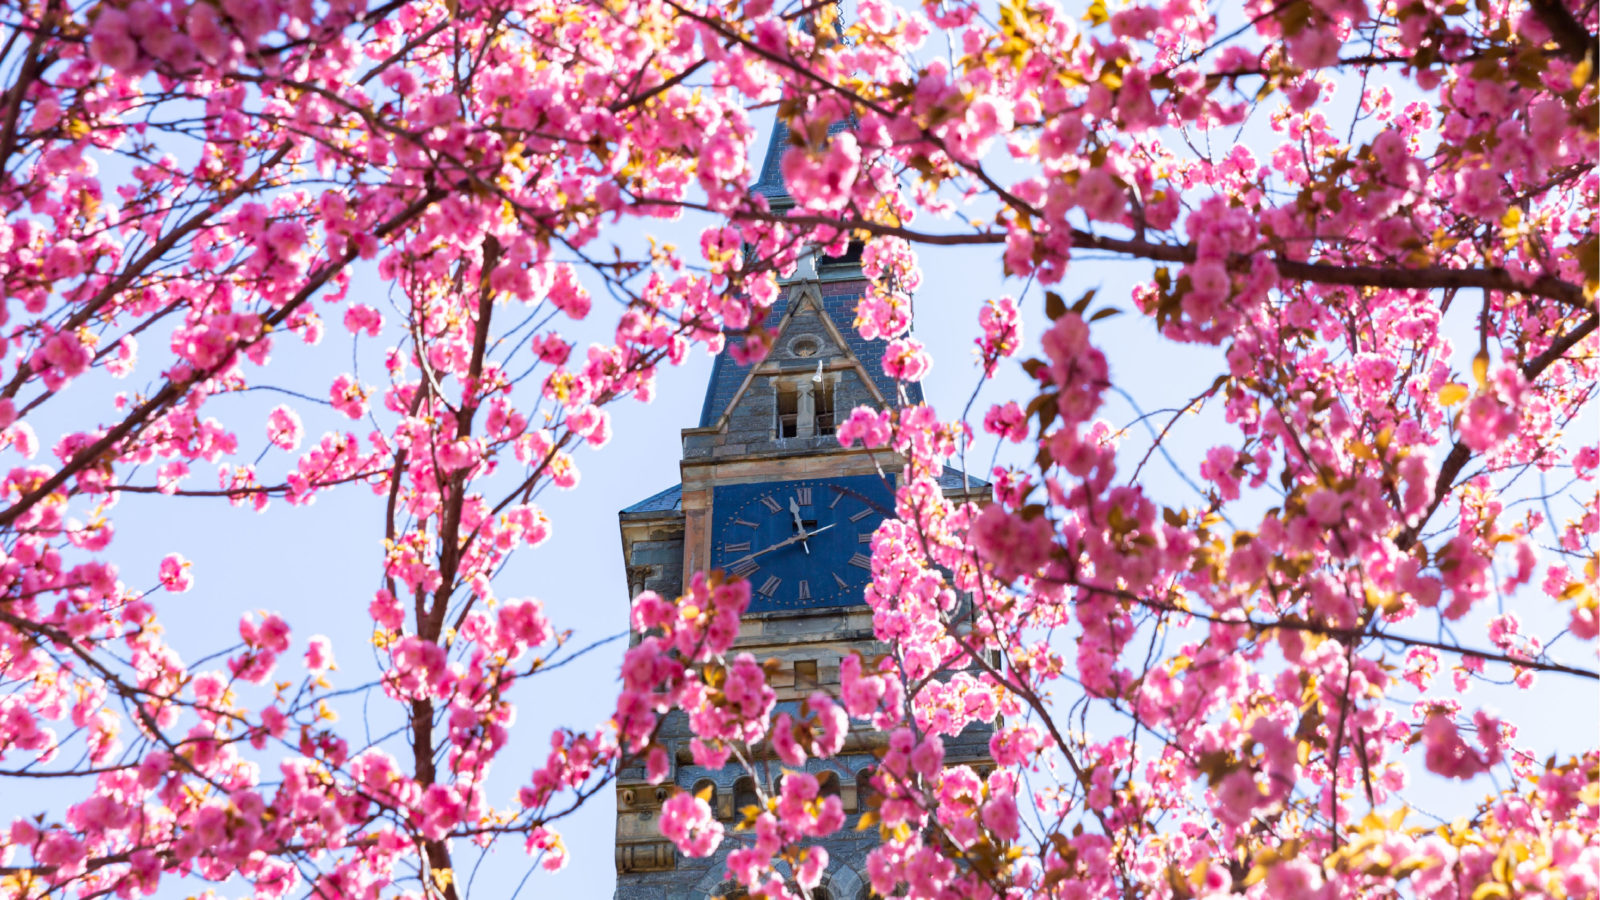 Cherry Blossoms on Campus - Healy Hall clock tower in background